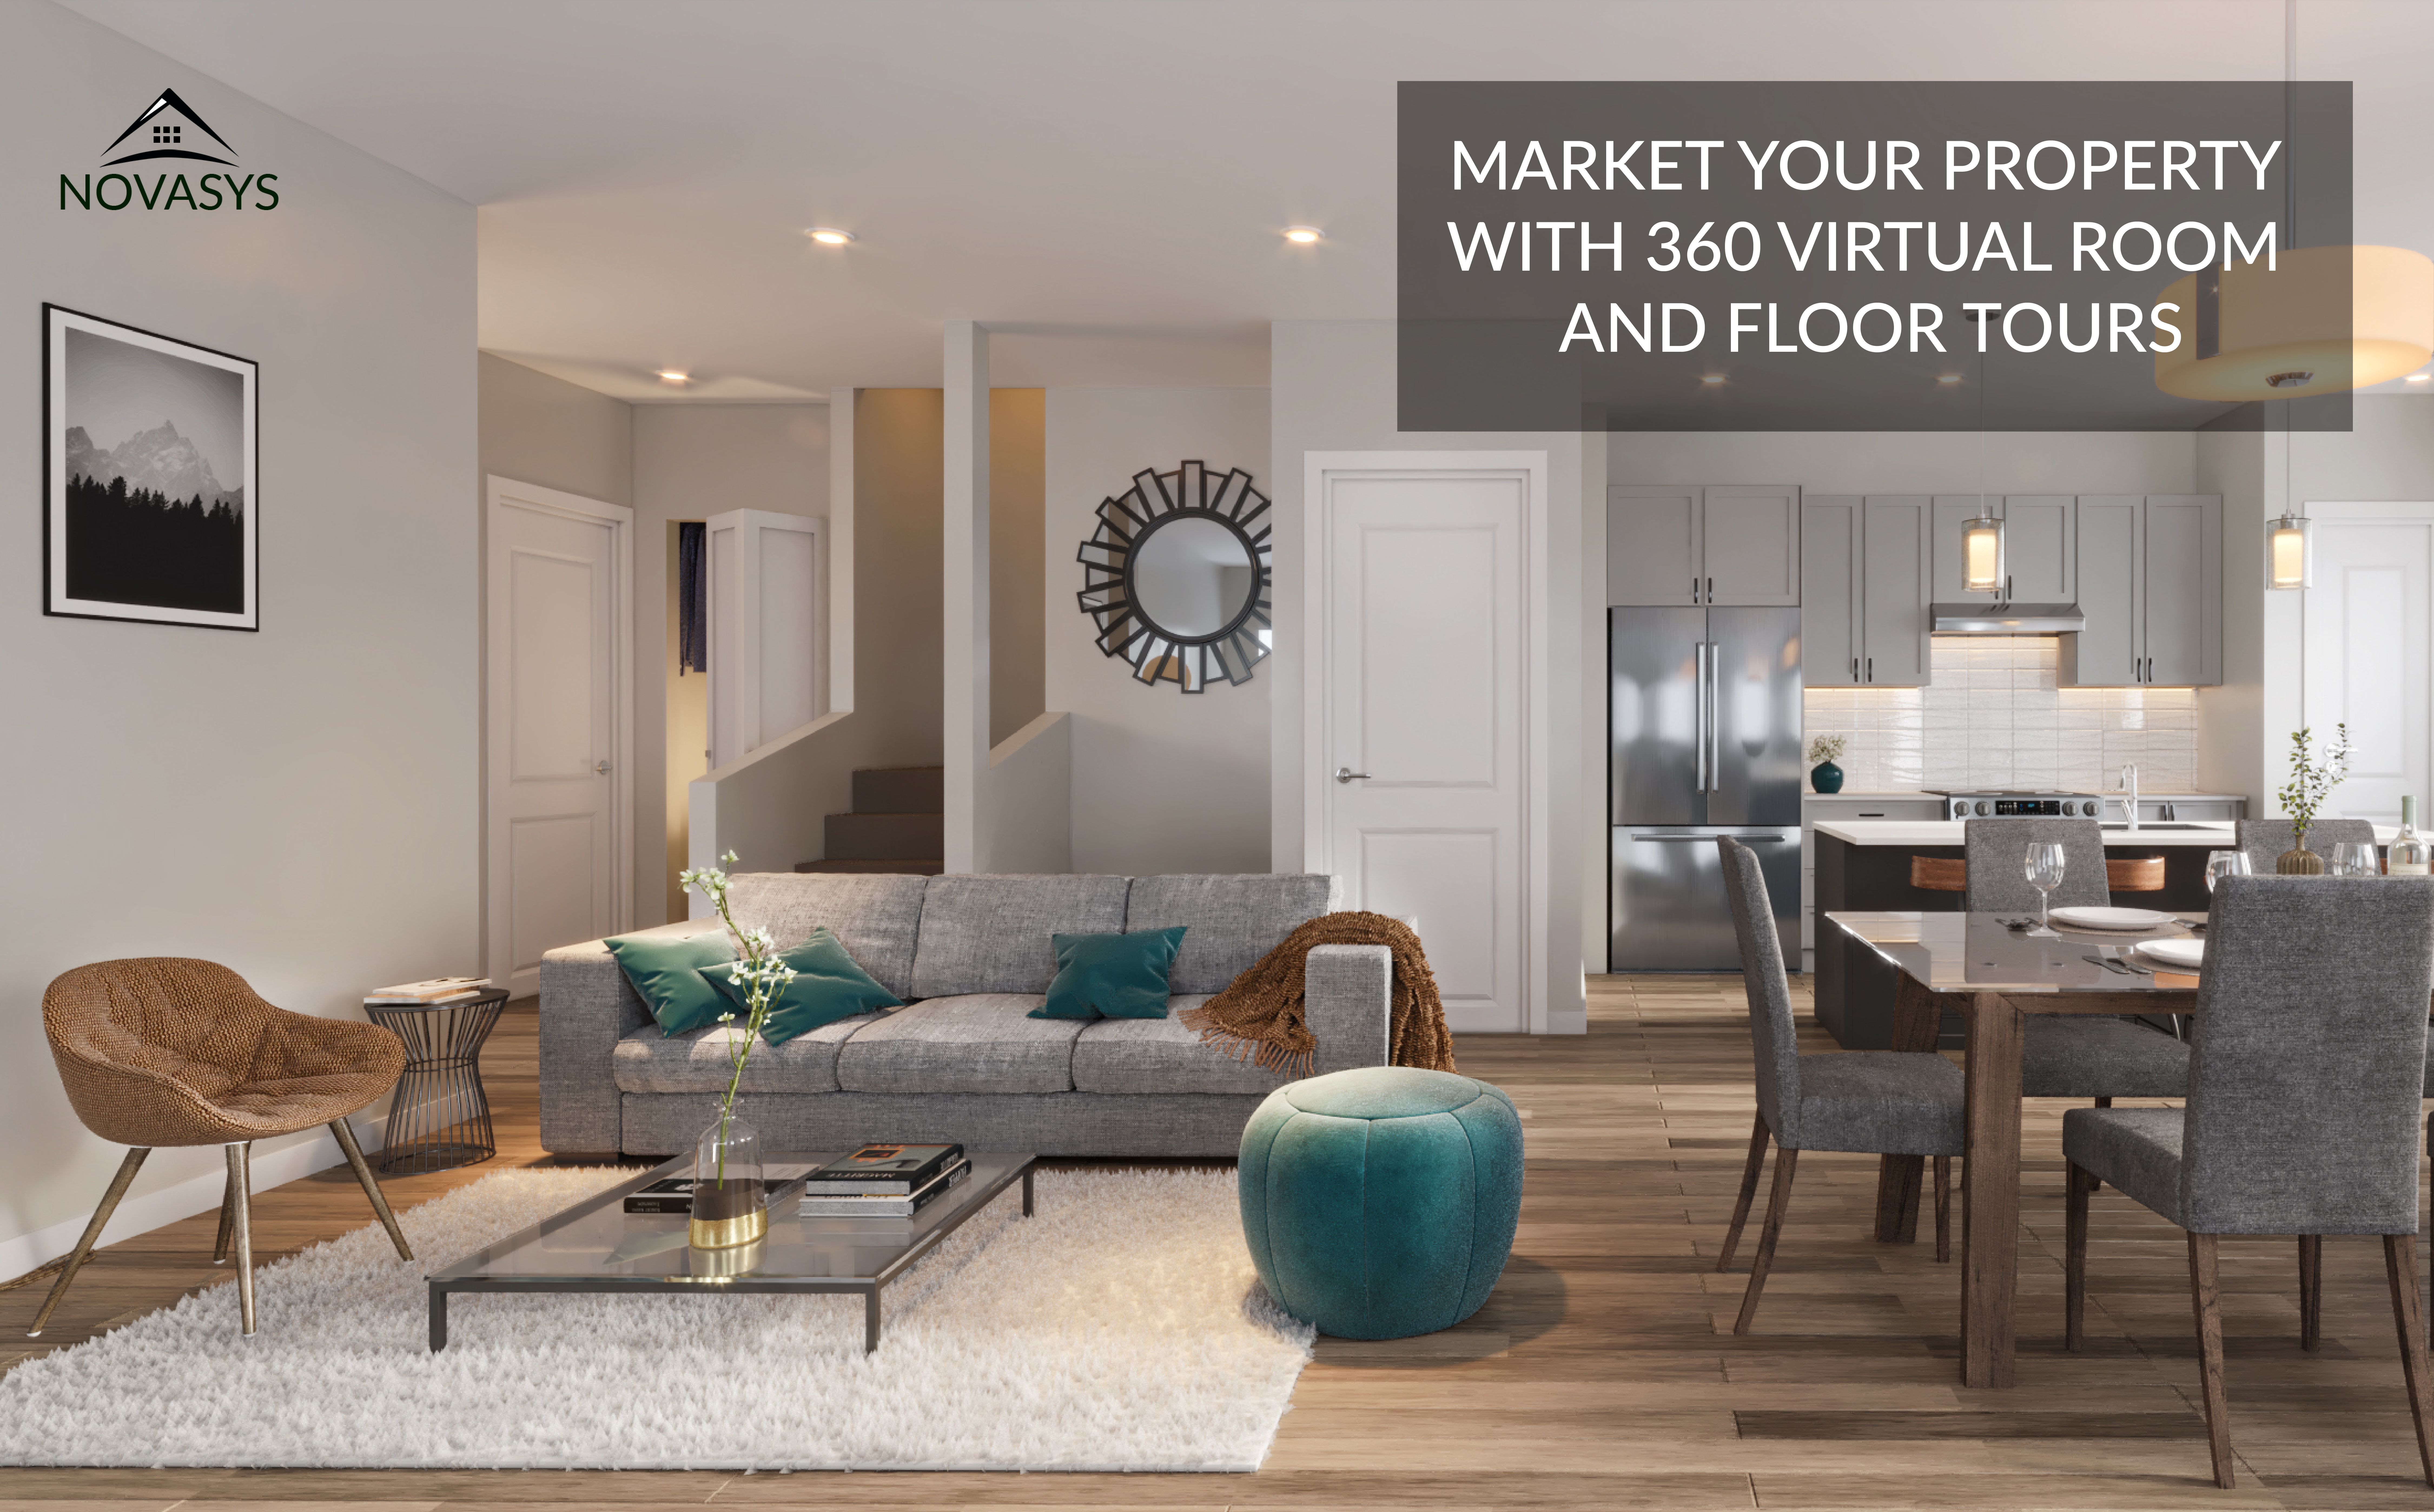 Marketing Virtual Room and Floor Tours